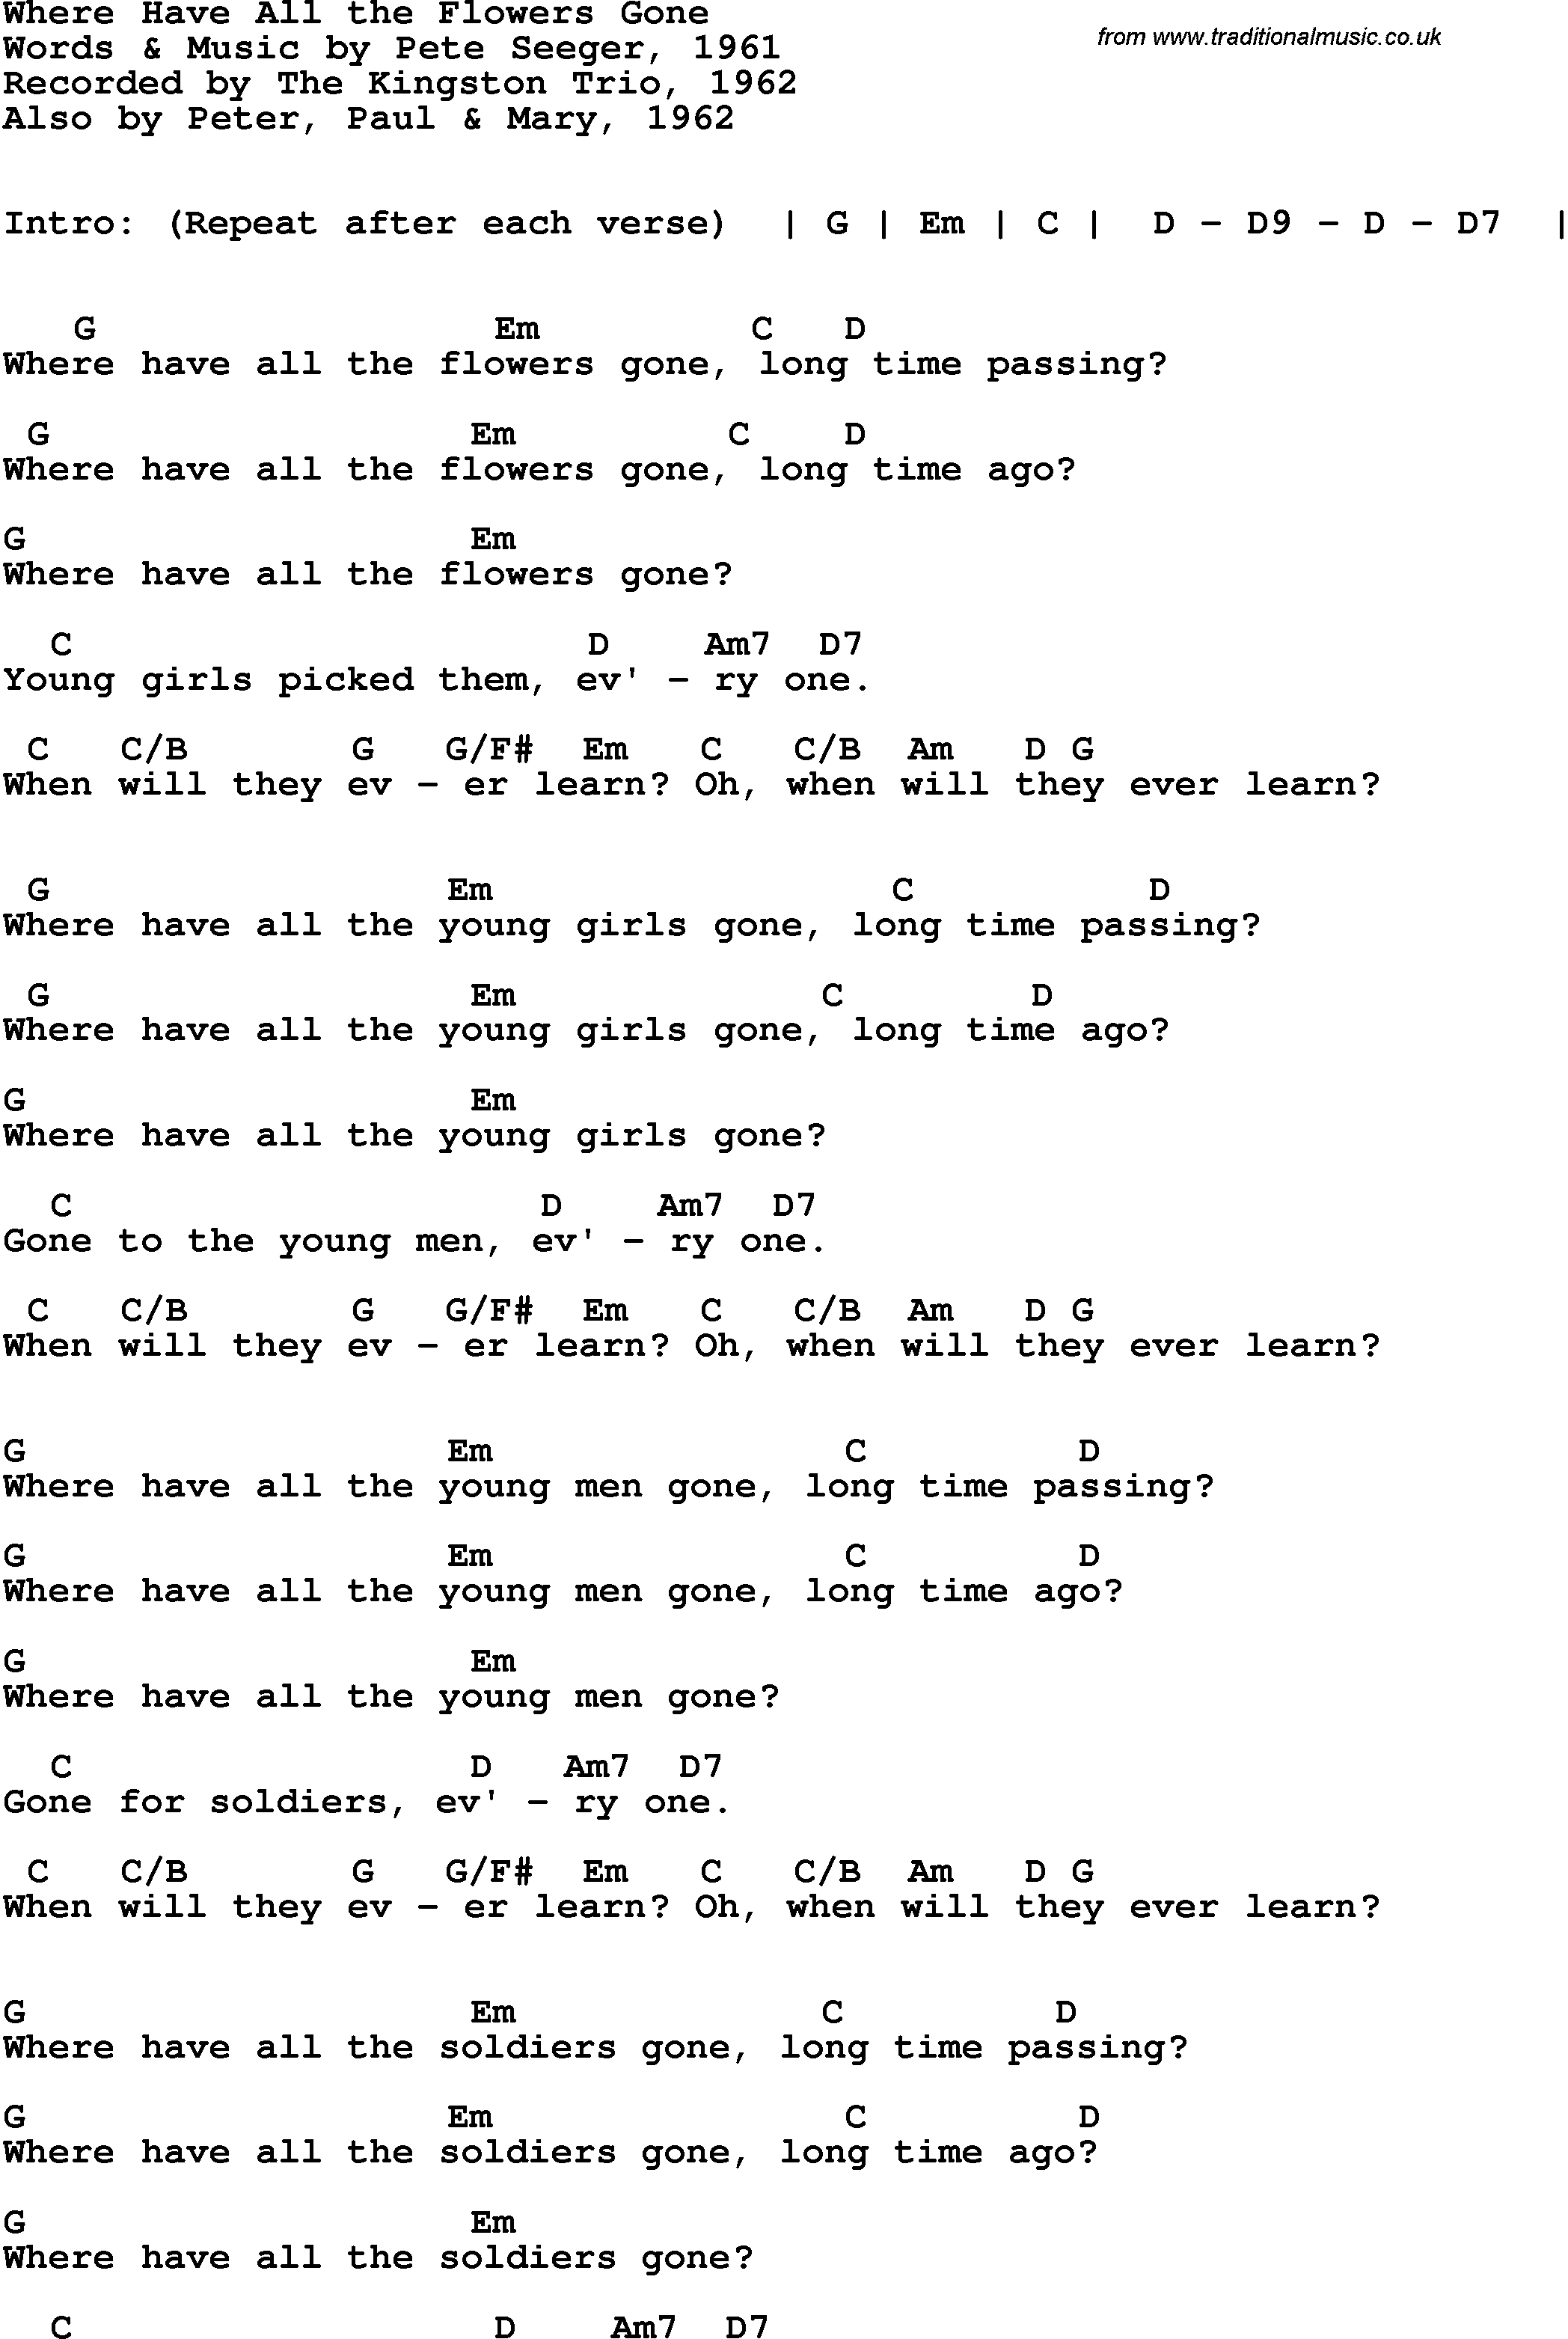 Song Lyrics with guitar chords for Where Have All The Flowers Gone - The Kingston Trio, 1962